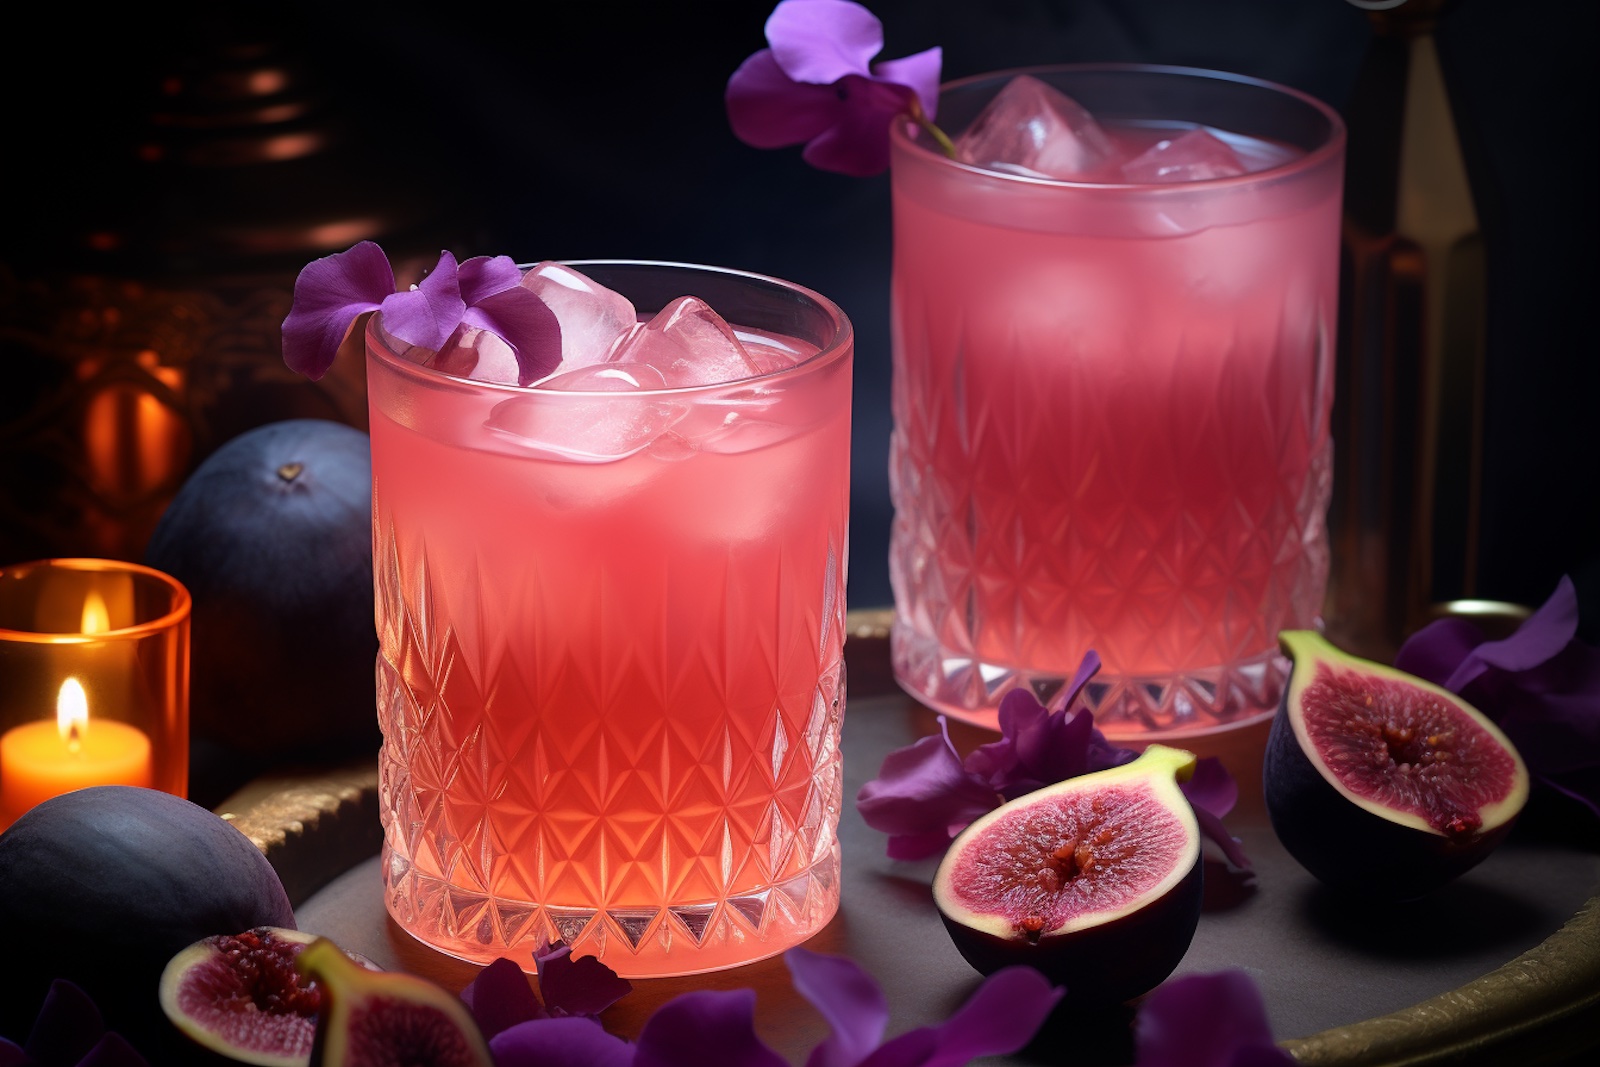 two classes with filled with pink mixed drink. Figs and flowers are scattered around the drinkware.